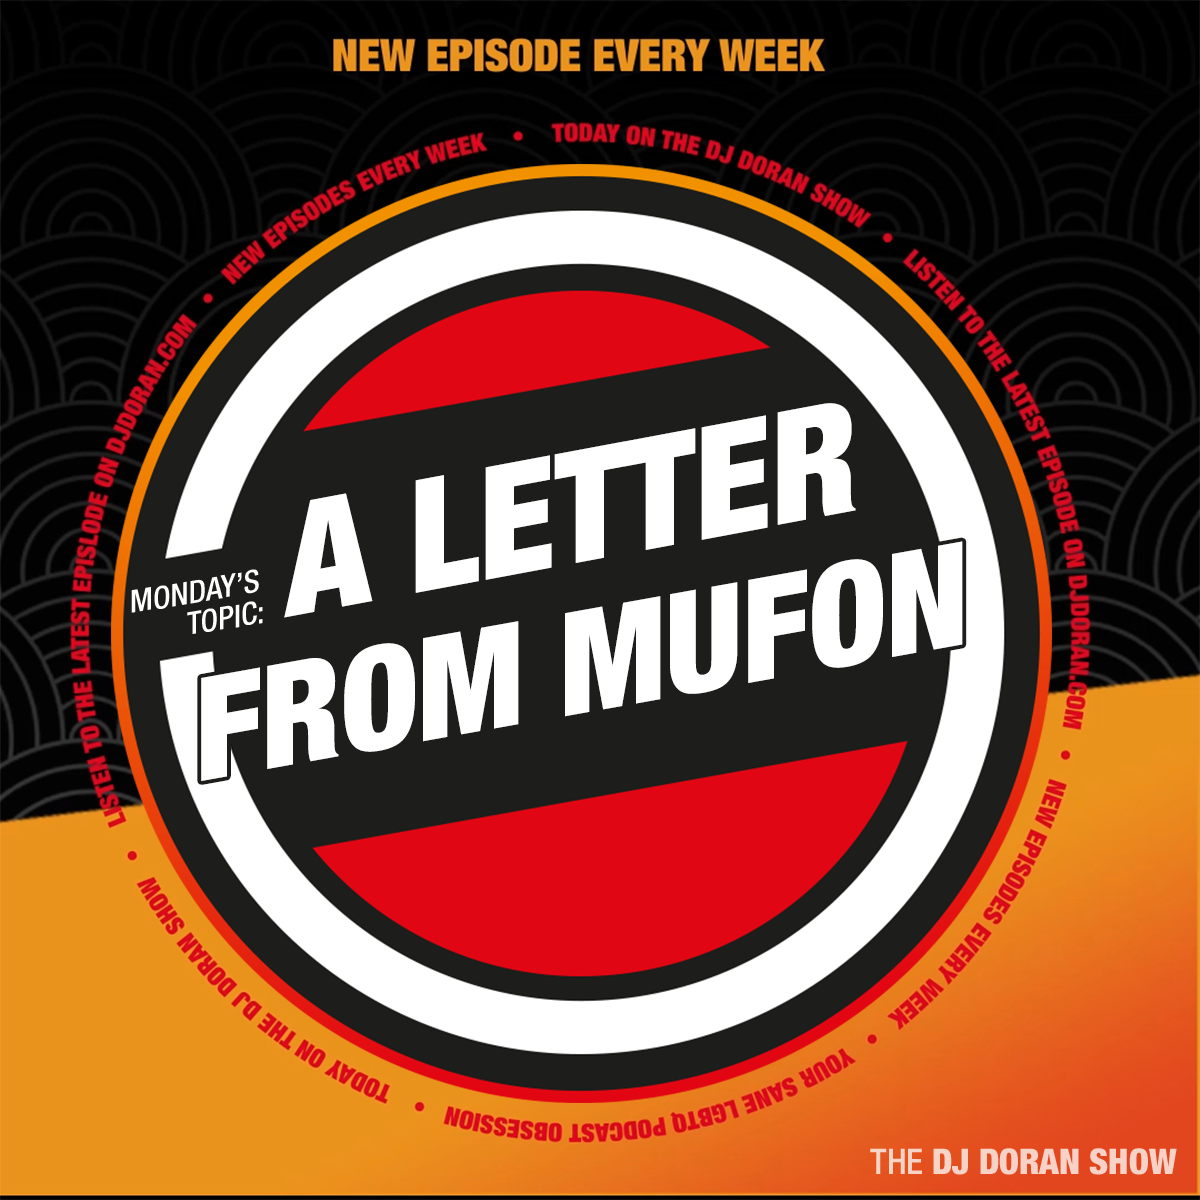 A Letter from MUFON